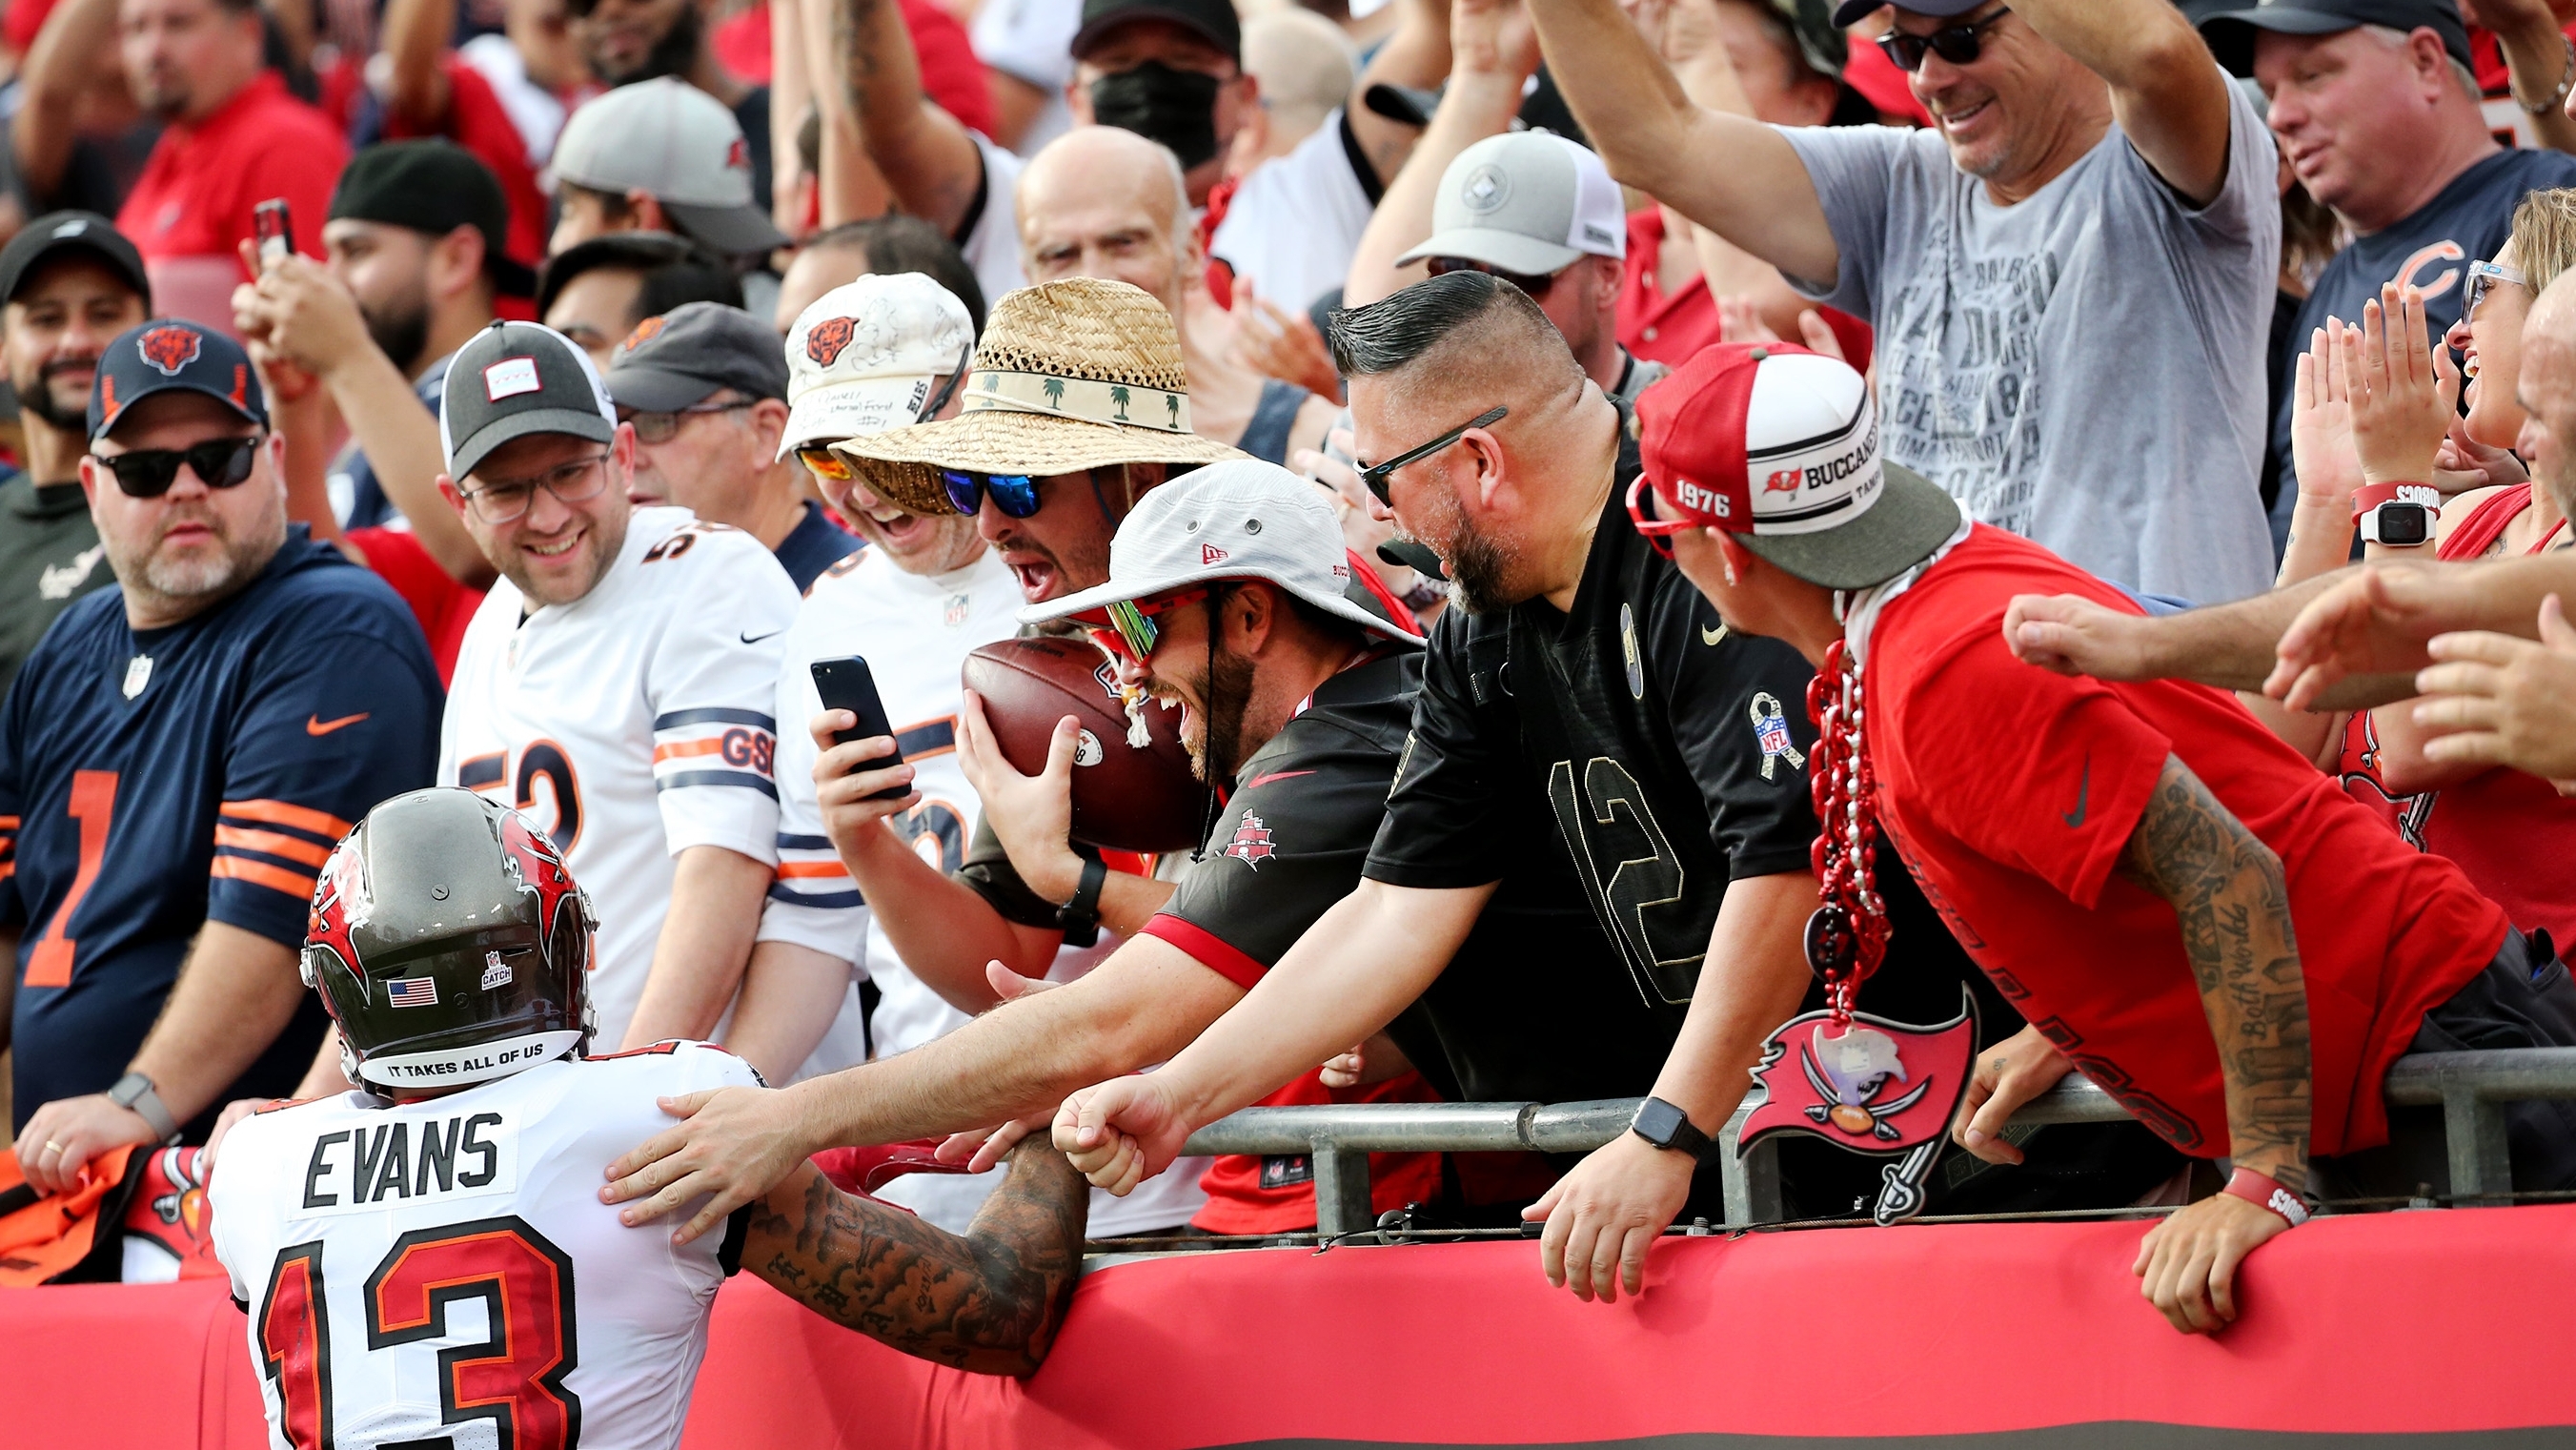 VIDEO: Tom Brady Already Has a Remarkable 'Florida Man' Tan in Welcome  Message to Tampa Bay Bucs Fans